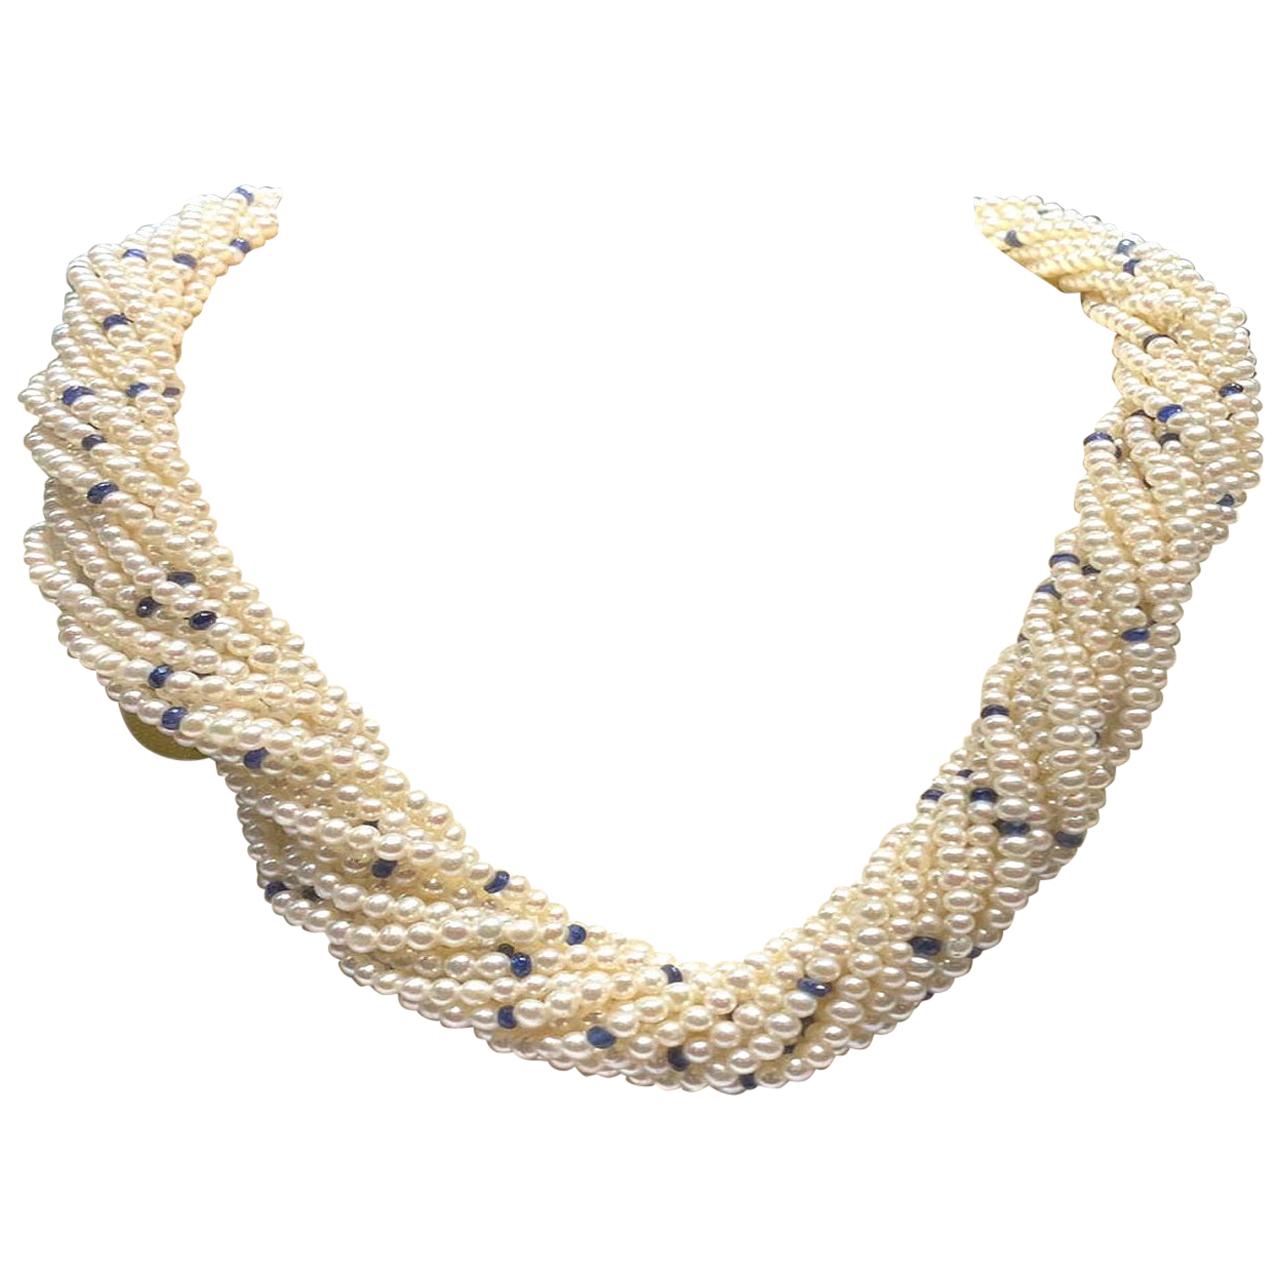 15 Strands of Biwa Pearls with Sapphire Beads and a 14k Yellow Gold Clasp For Sale